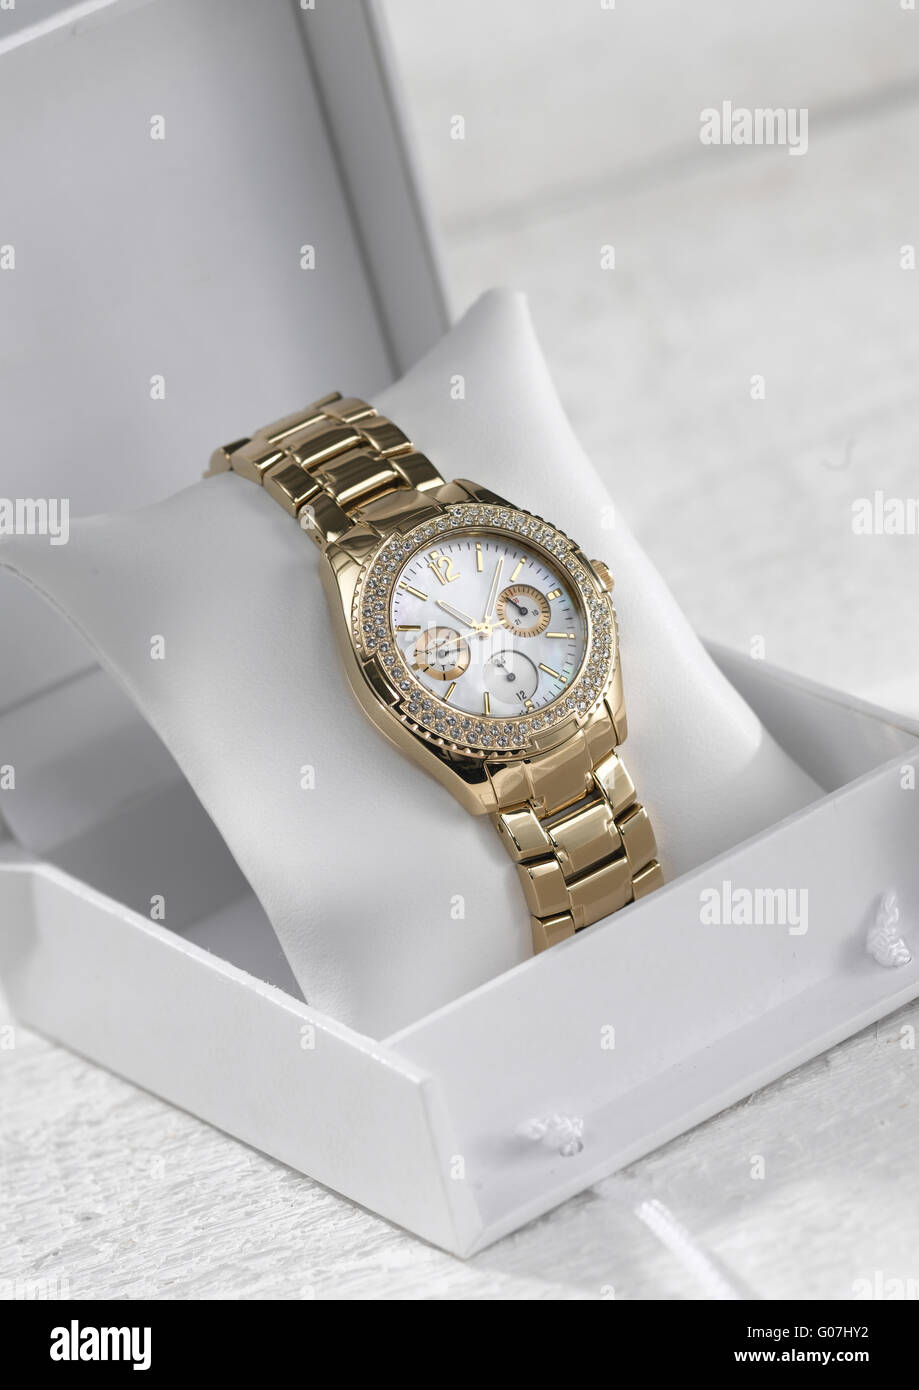 Gold Lady watch in white box Stock Photo